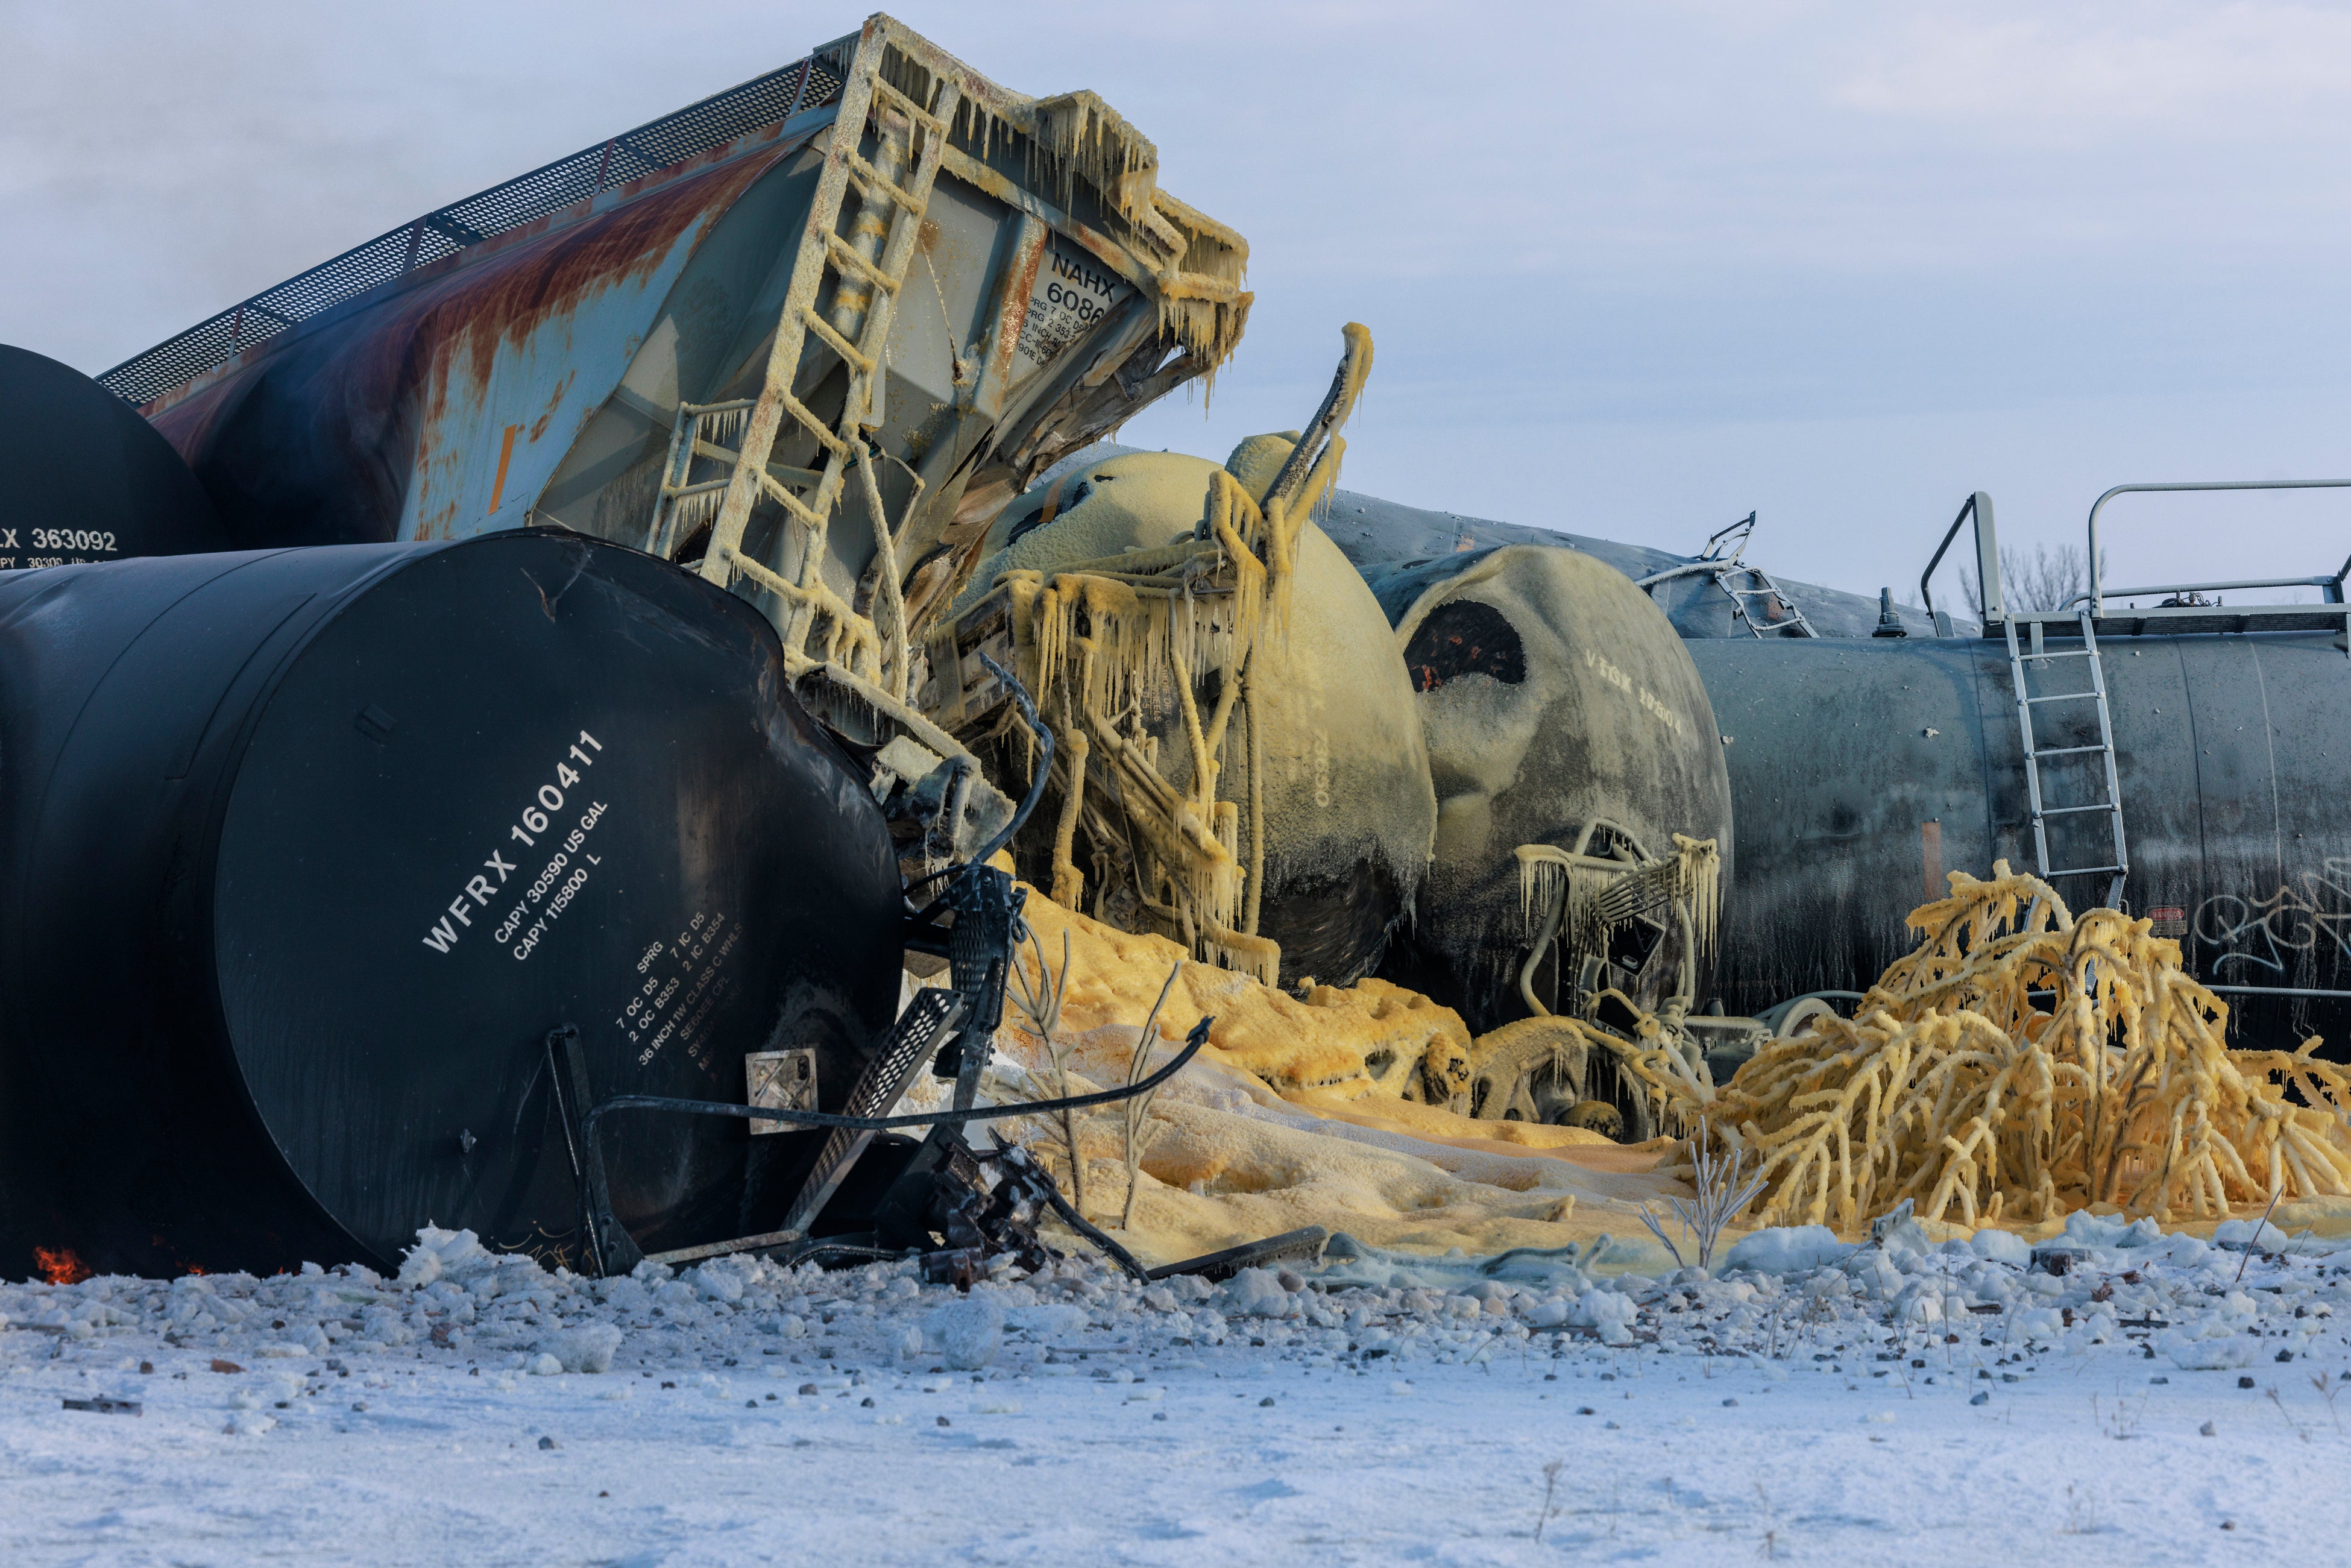 The BNSF freight train was carrying ethanol and corn syrup when it derailed in rural Minnesota